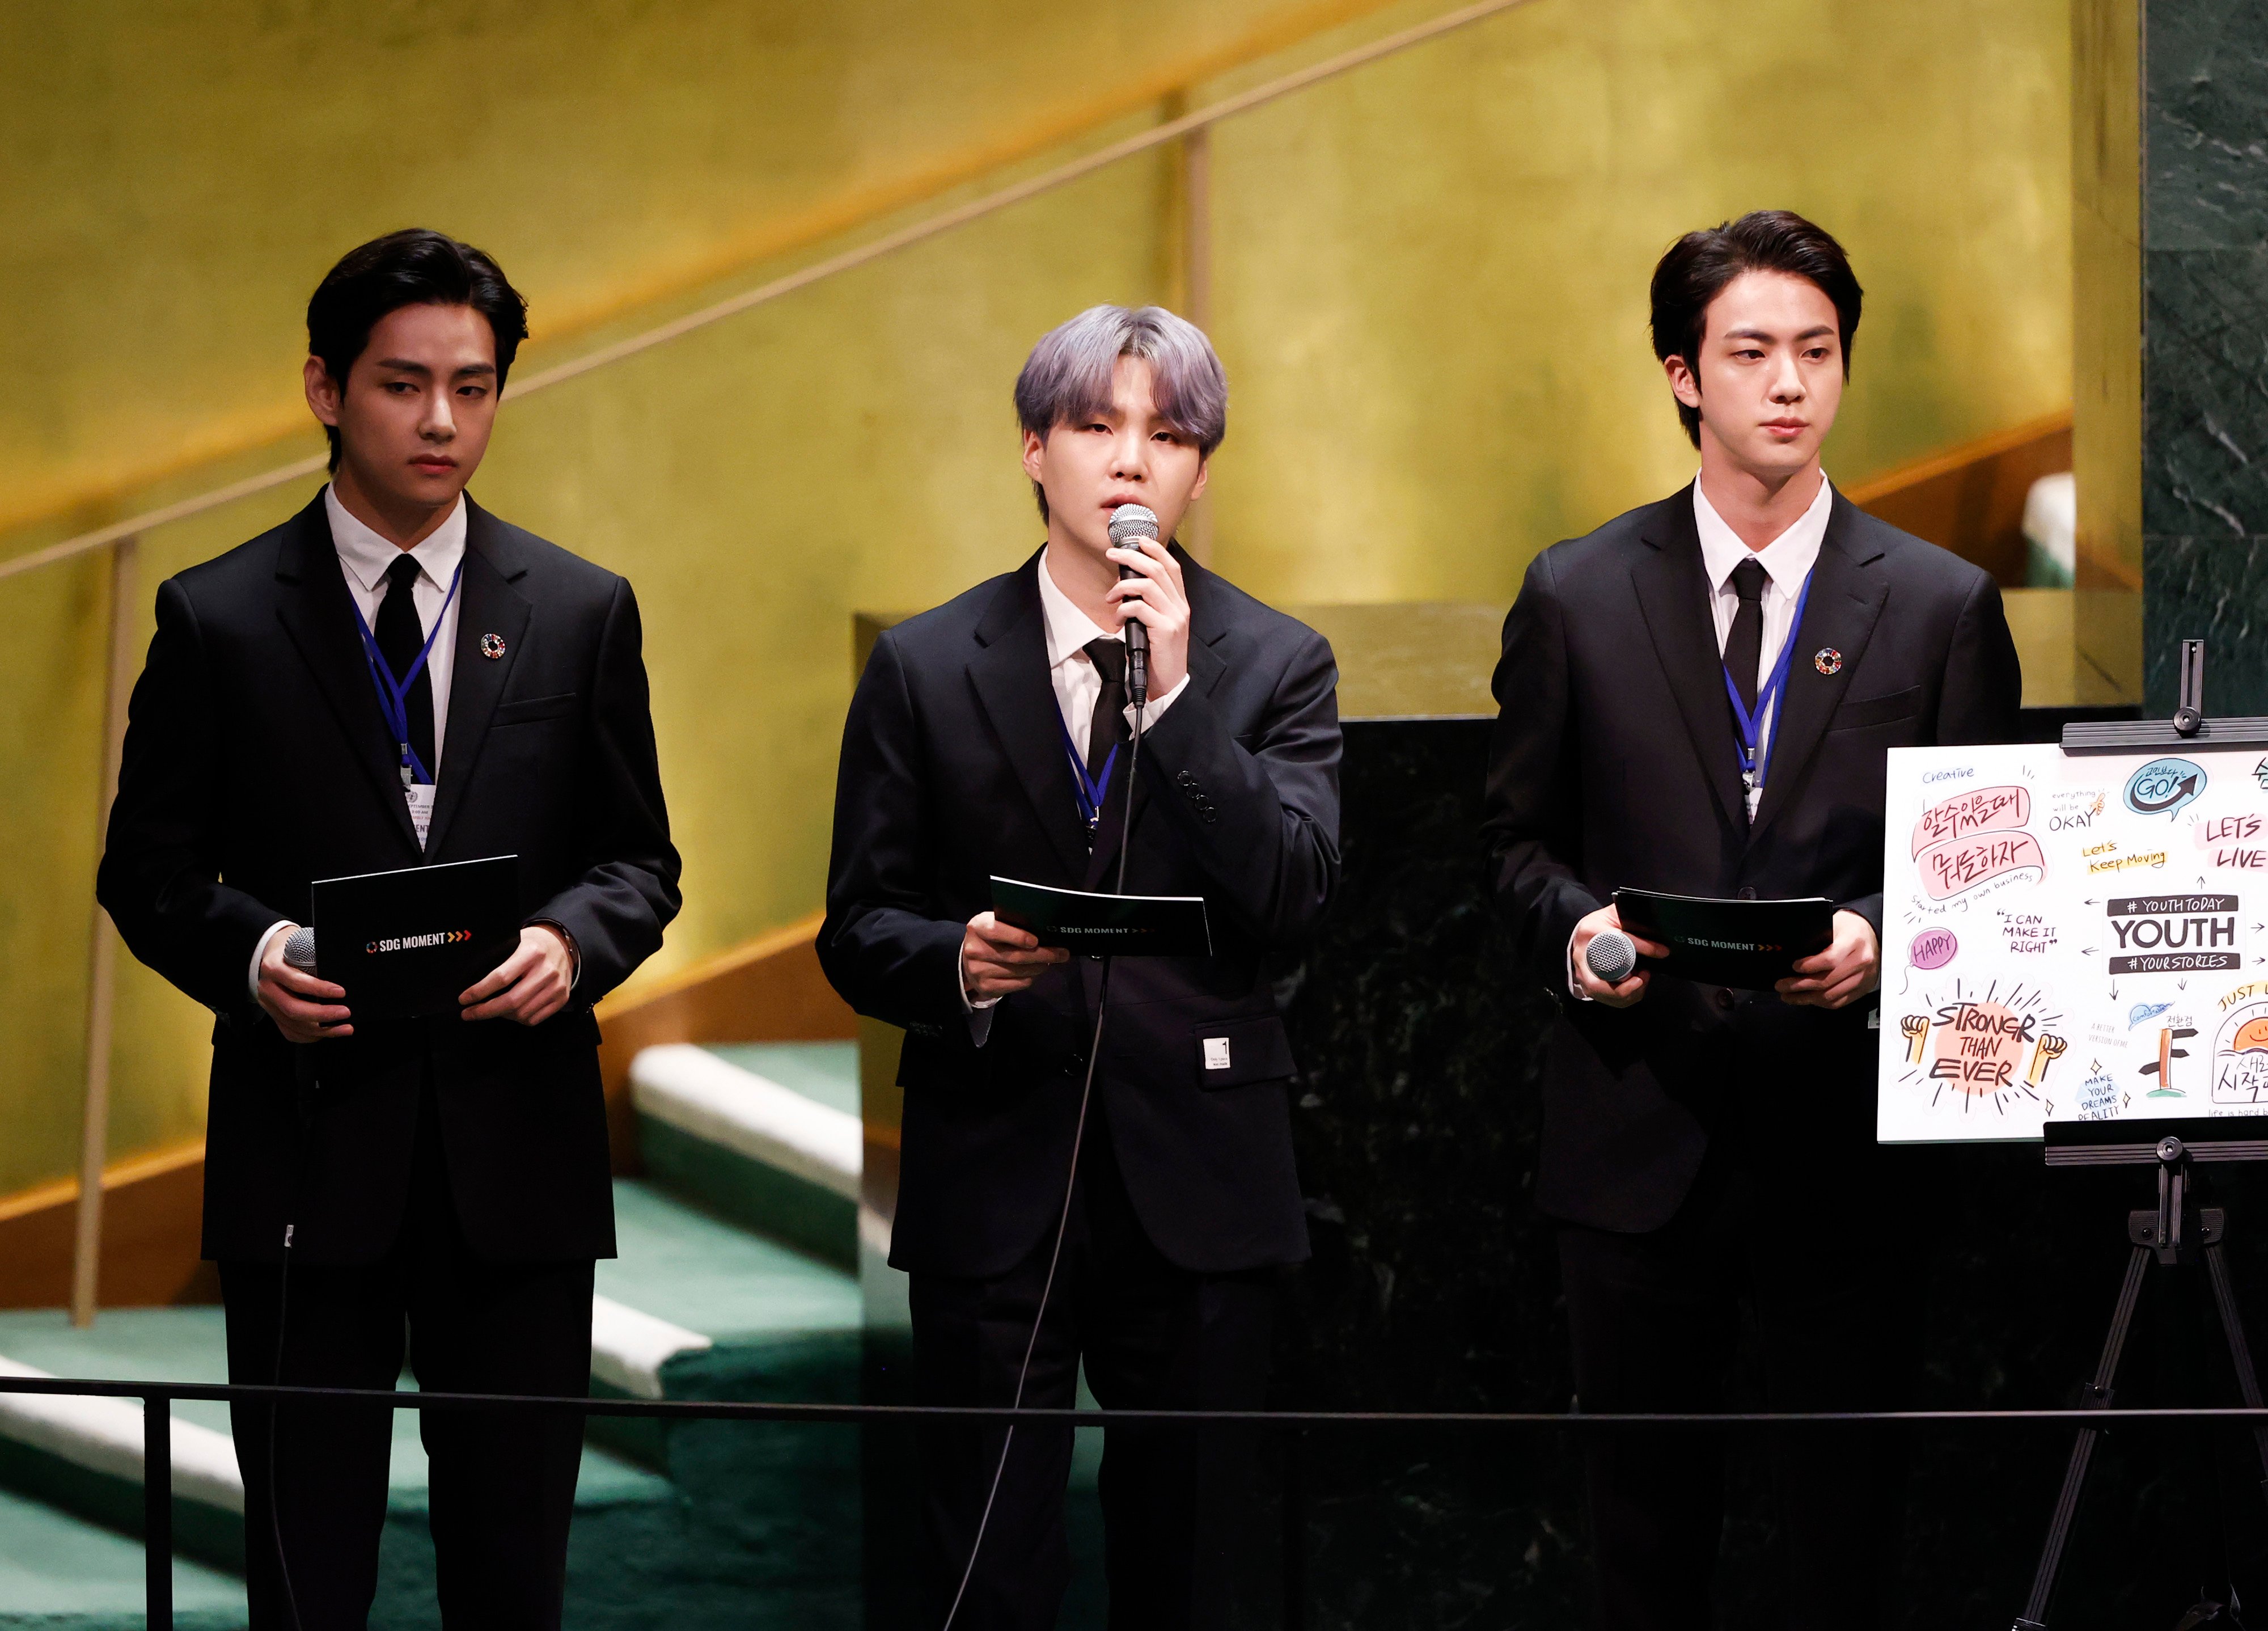 Taehyung/V, Suga, and Jin of boy band BTS at the SDG Moment event as part of the UN General Assembly 76th session General Debate